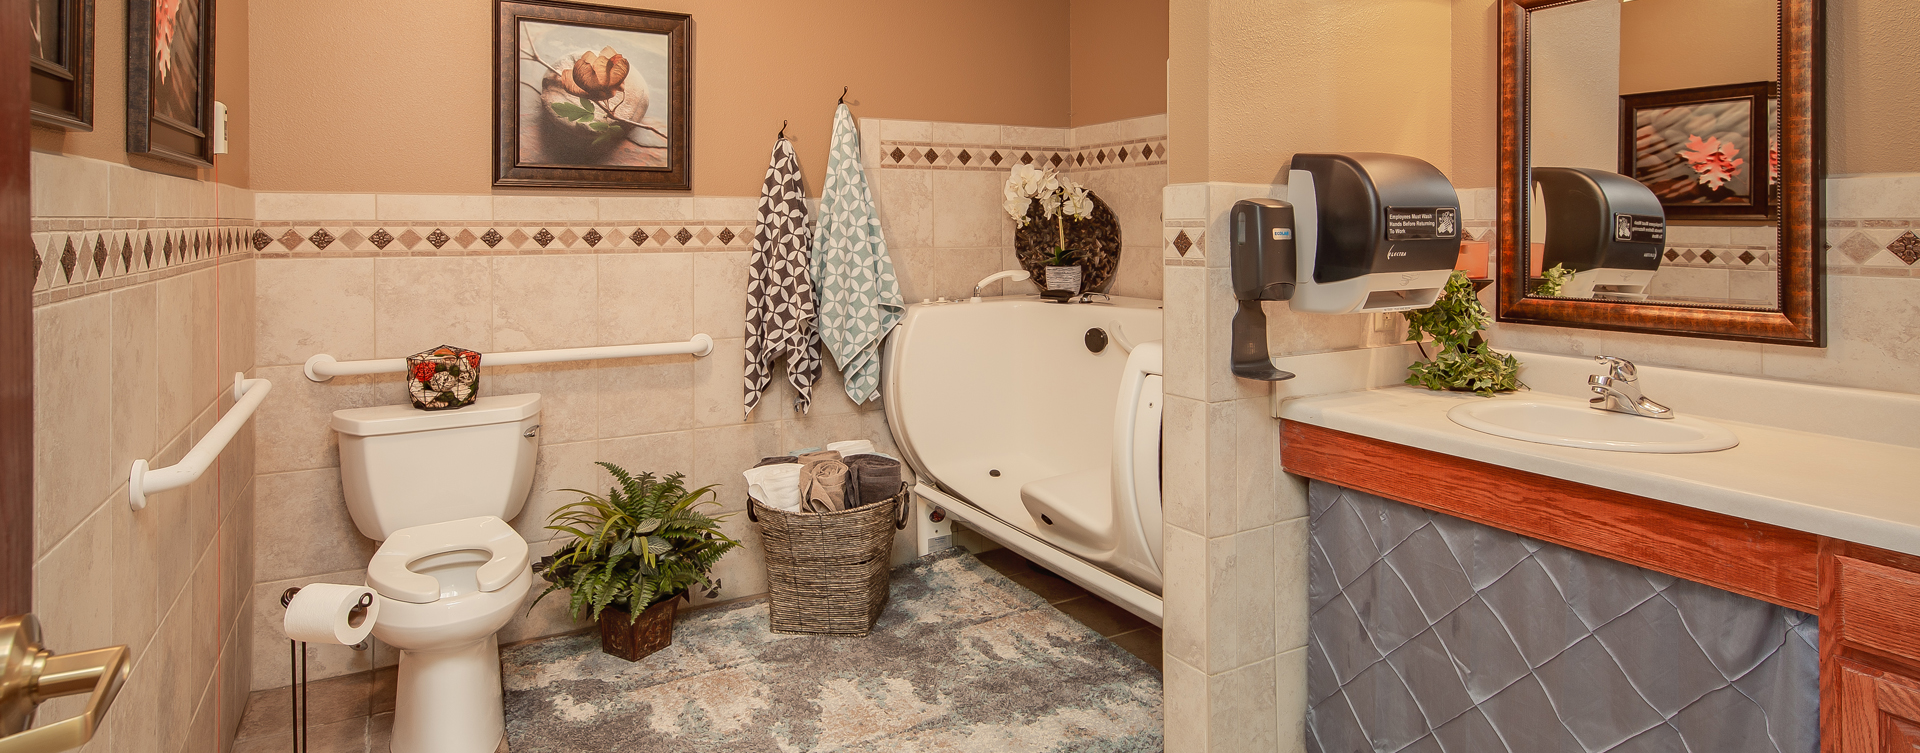 With an easy access design, our whirlpool allows you to enjoy a warm bath safely and comfortably at Bickford of Portage